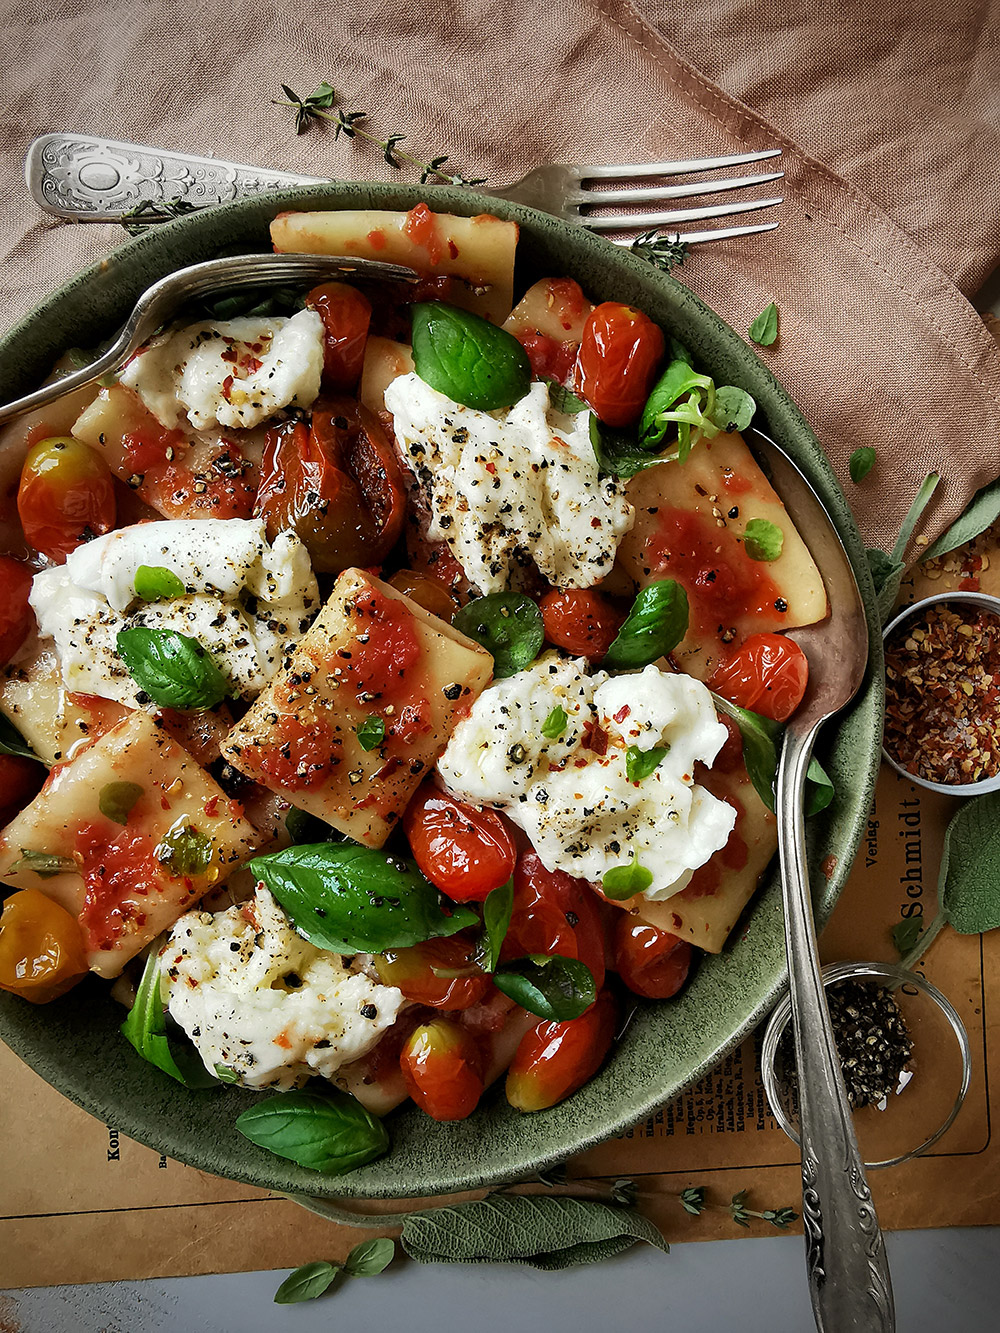 Paccheri, burrata and garlicky roasted tomatoes